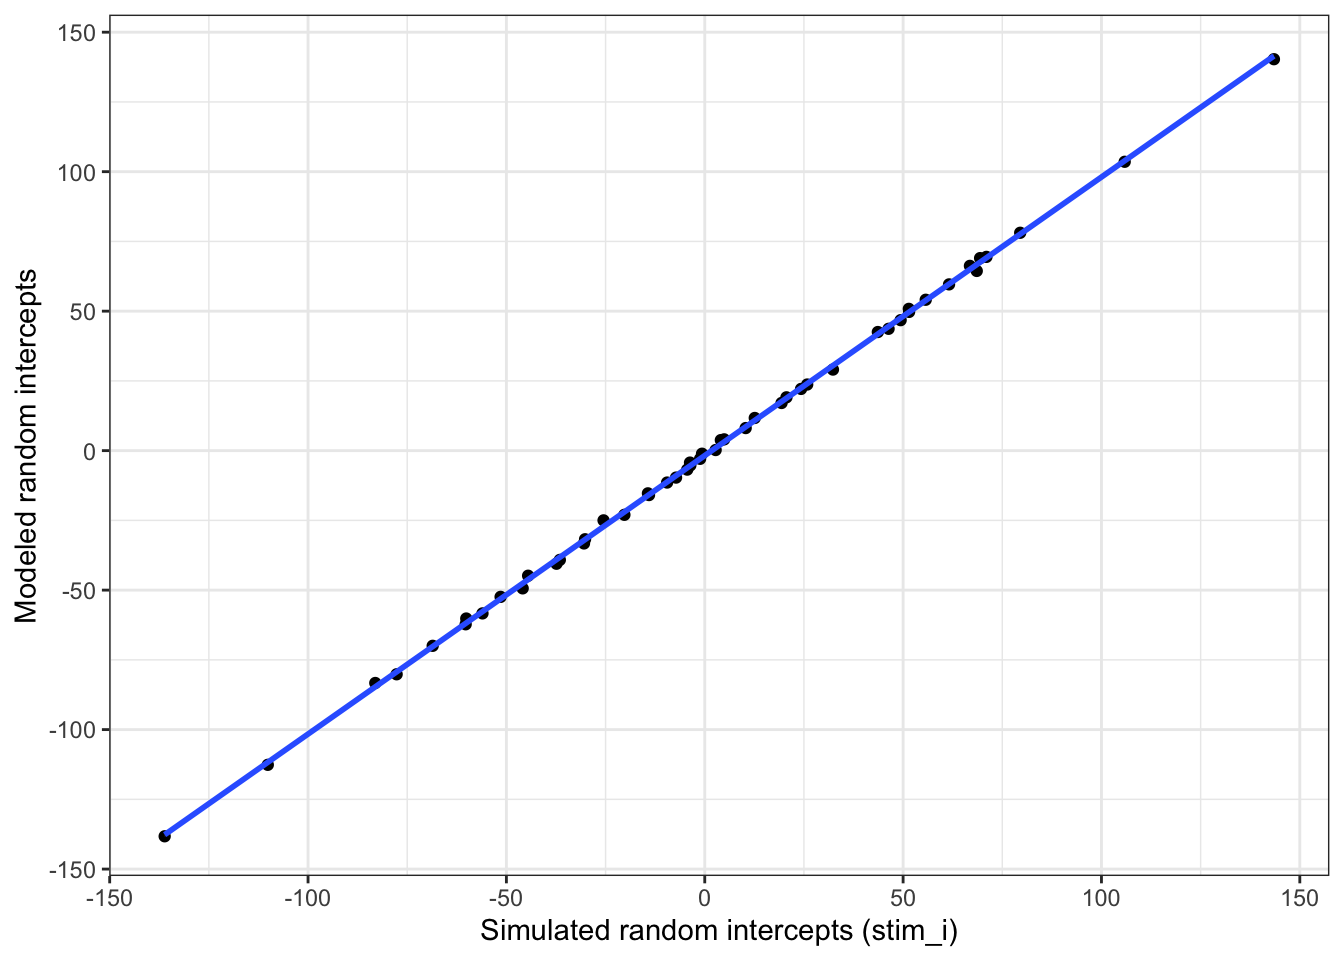 Compare simulated stimulus random intercepts to those from the model